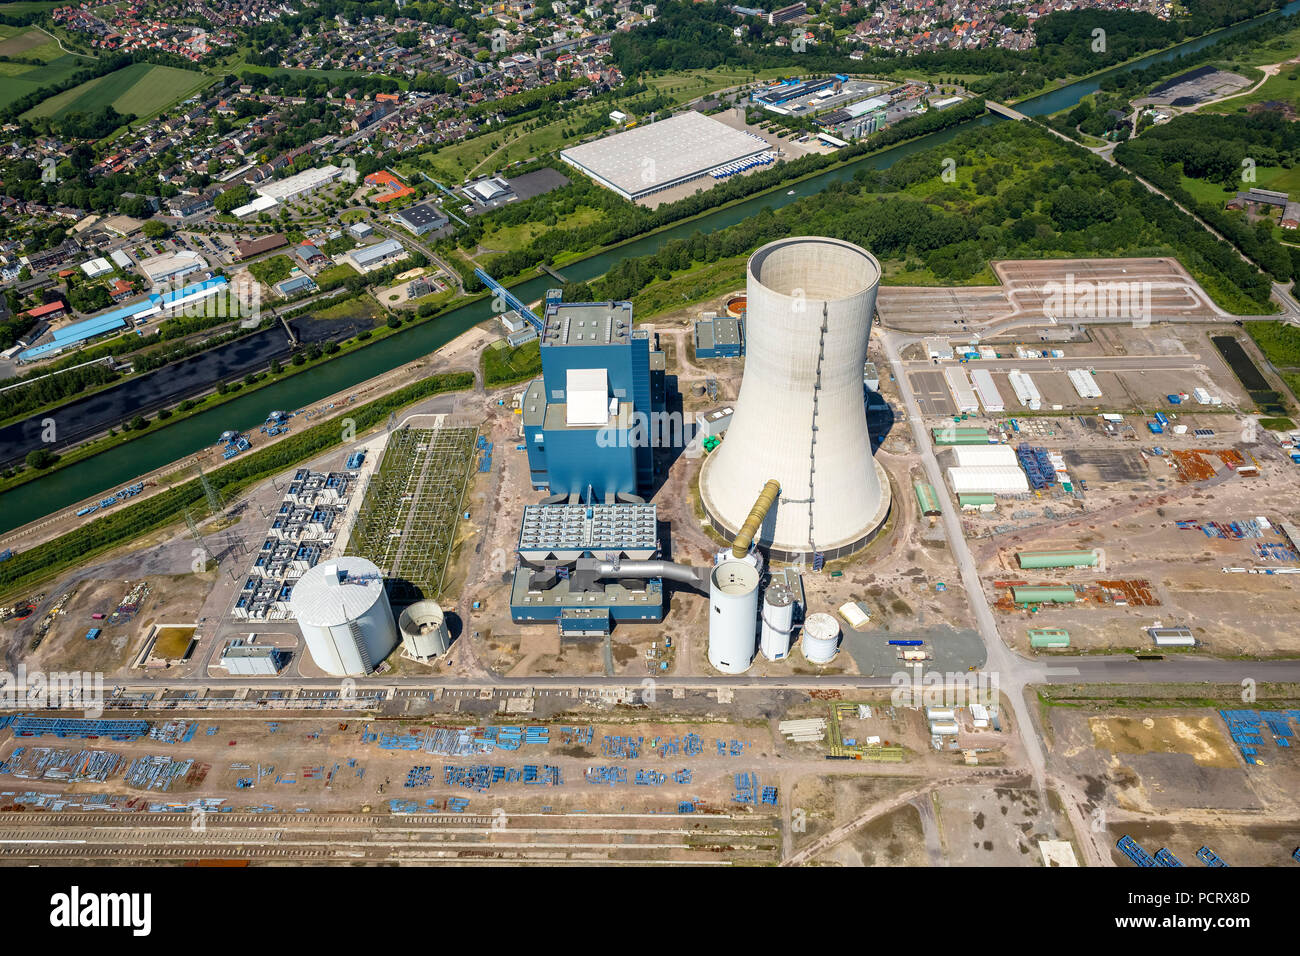 Power station construction EON Datteln 4, construction freeze due to legal problems after a faulty development plan, Dortmund-Ems canal, near the former coal power plant EON Datteln 1-3, Datteln, Ruhr area, North Rhine-Westphalia, Germany Stock Photo